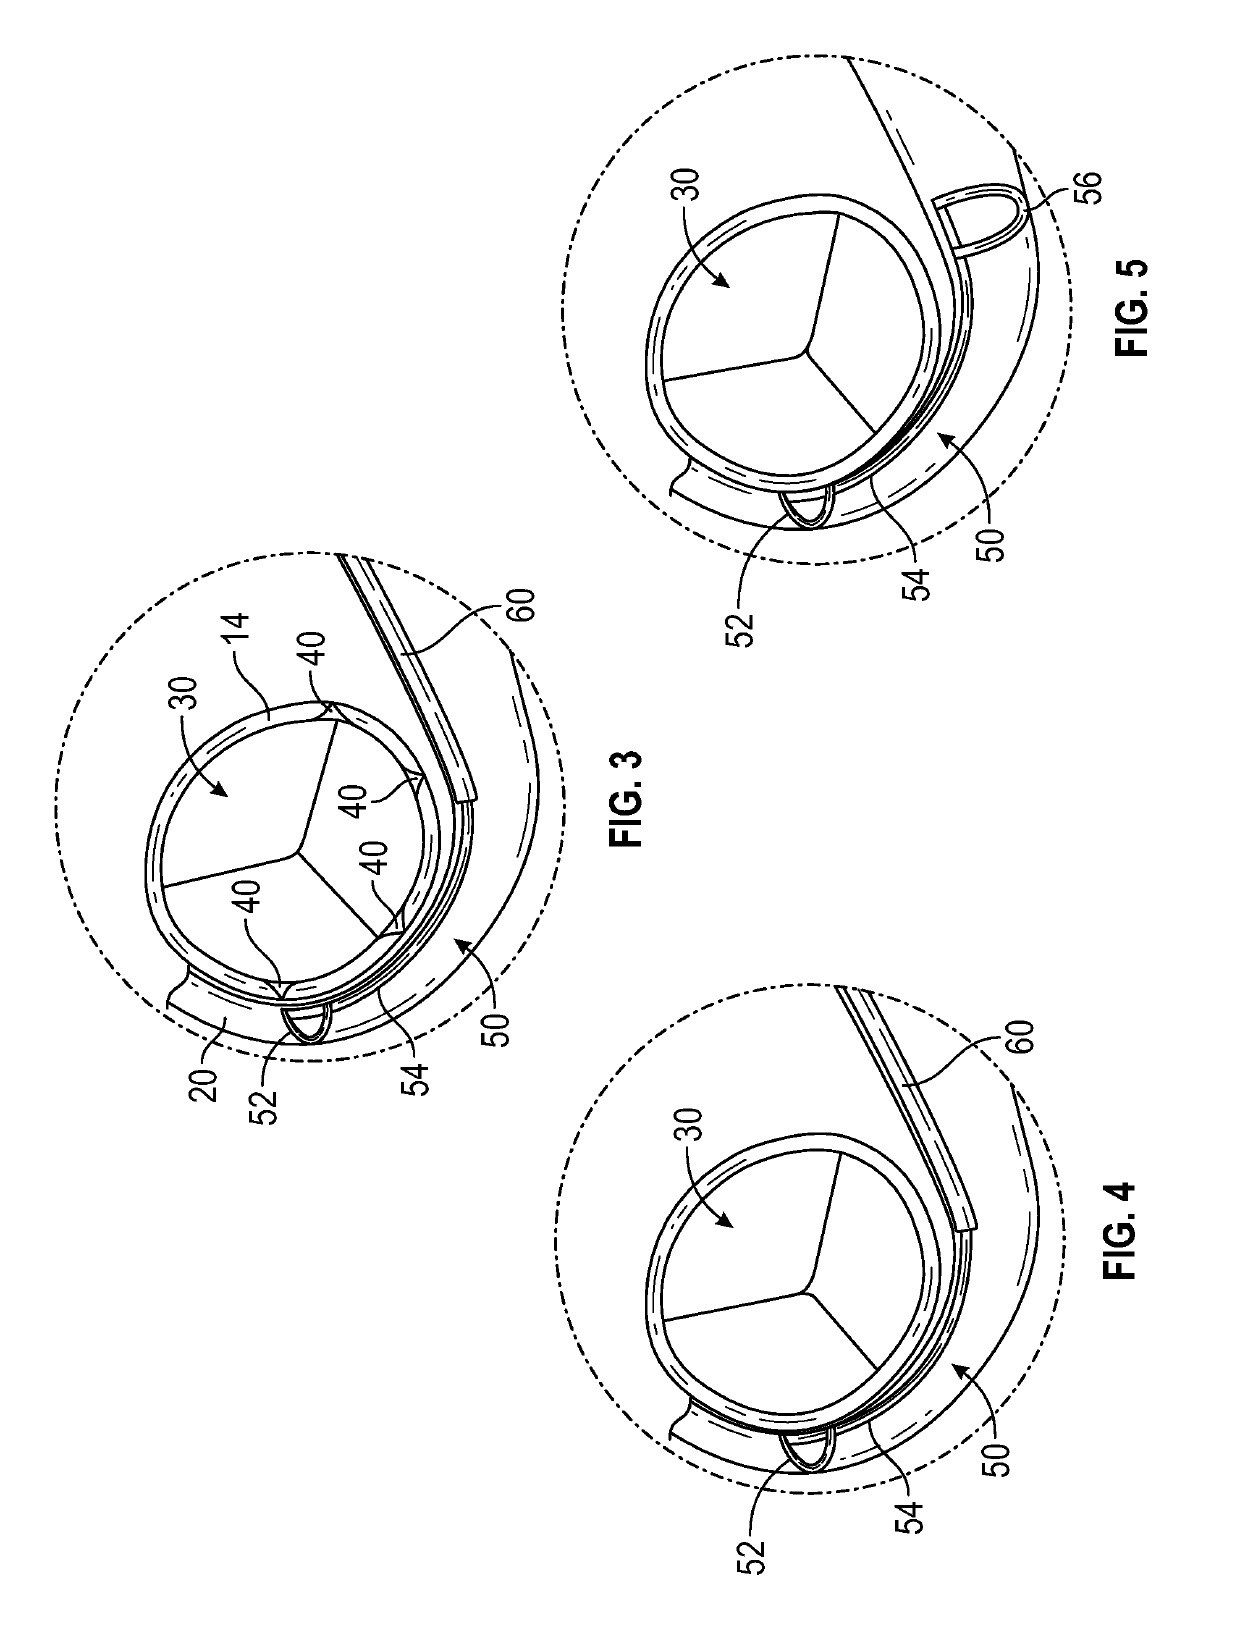 Methods and devices for reducing paravalvular leakage